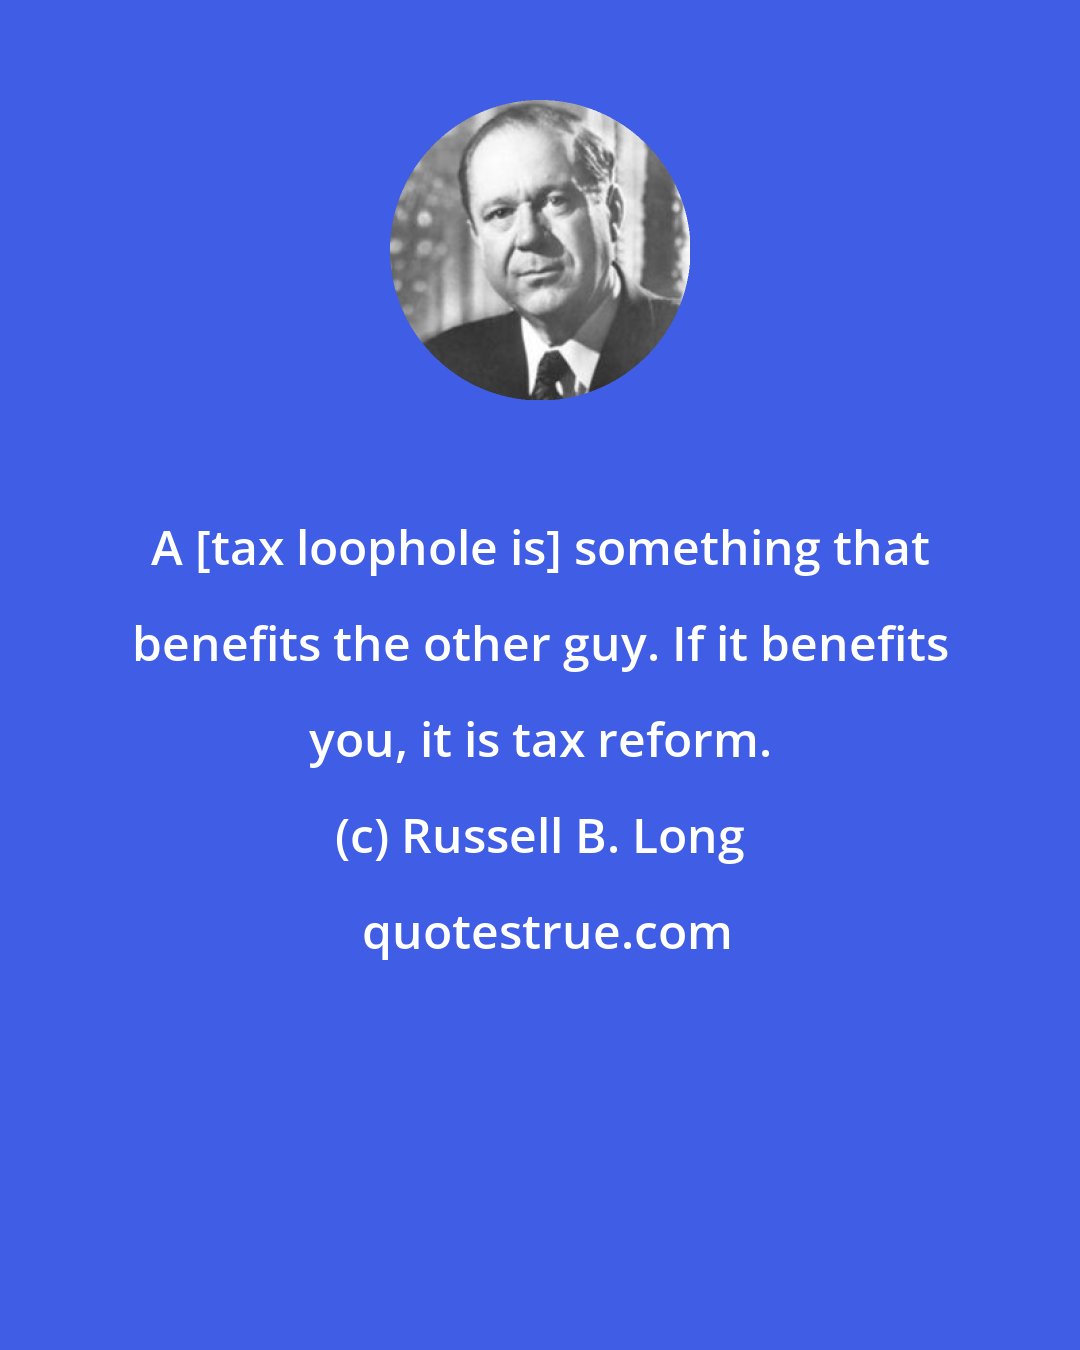 Russell B. Long: A [tax loophole is] something that benefits the other guy. If it benefits you, it is tax reform.